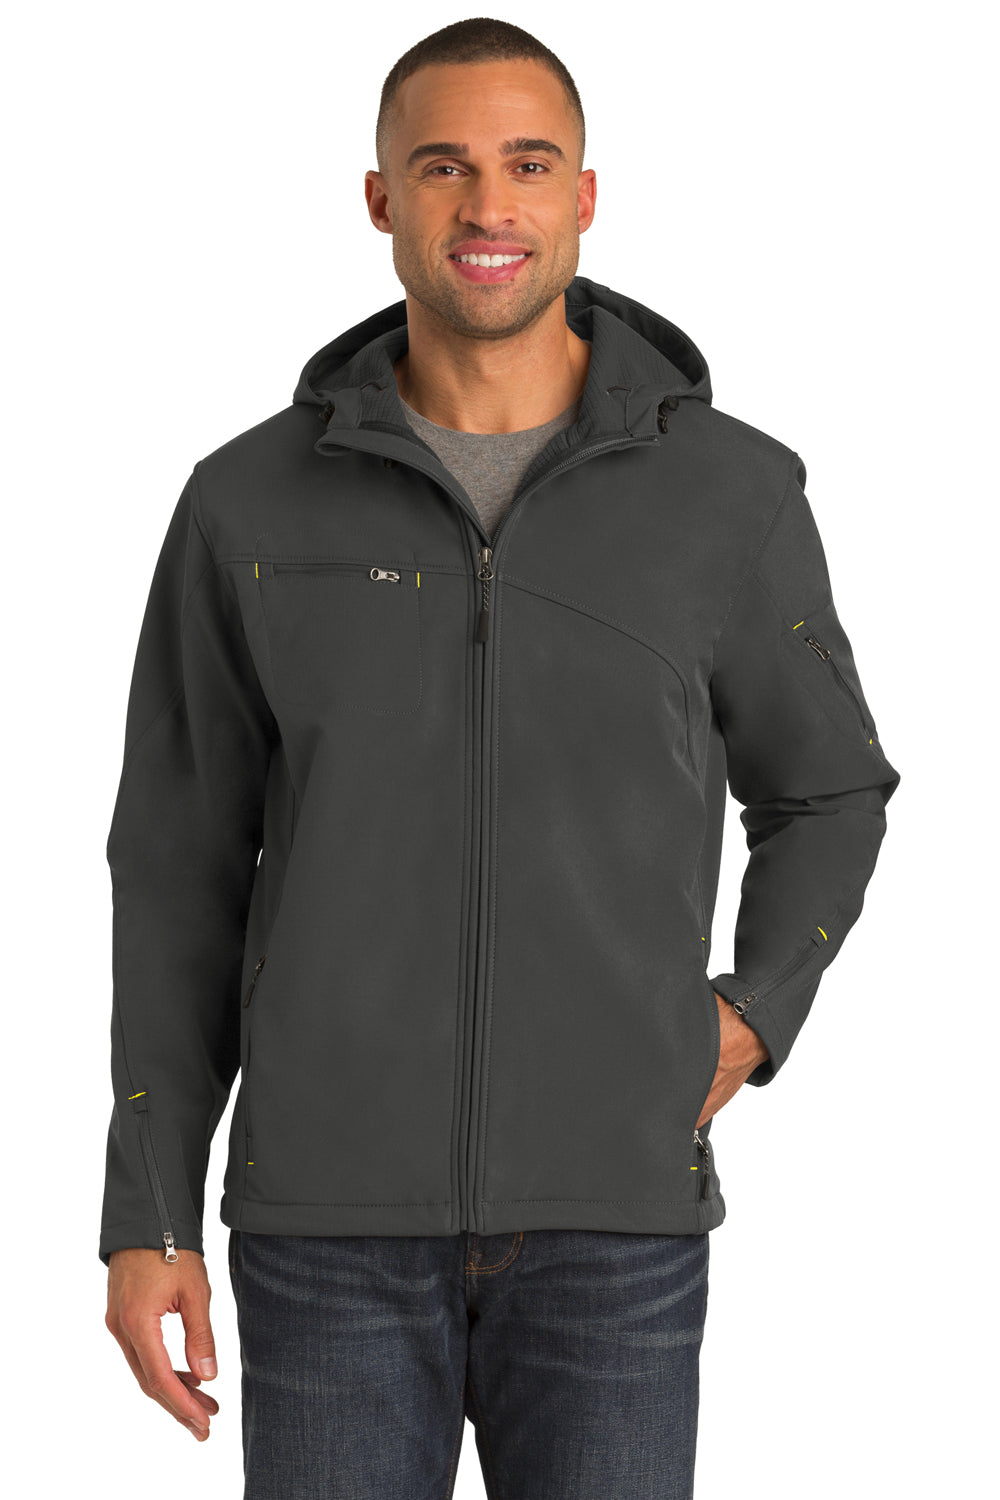 Port Authority J706 Mens Wind & Water Resistant Full Zip Hooded Jacket Charcoal Grey Front